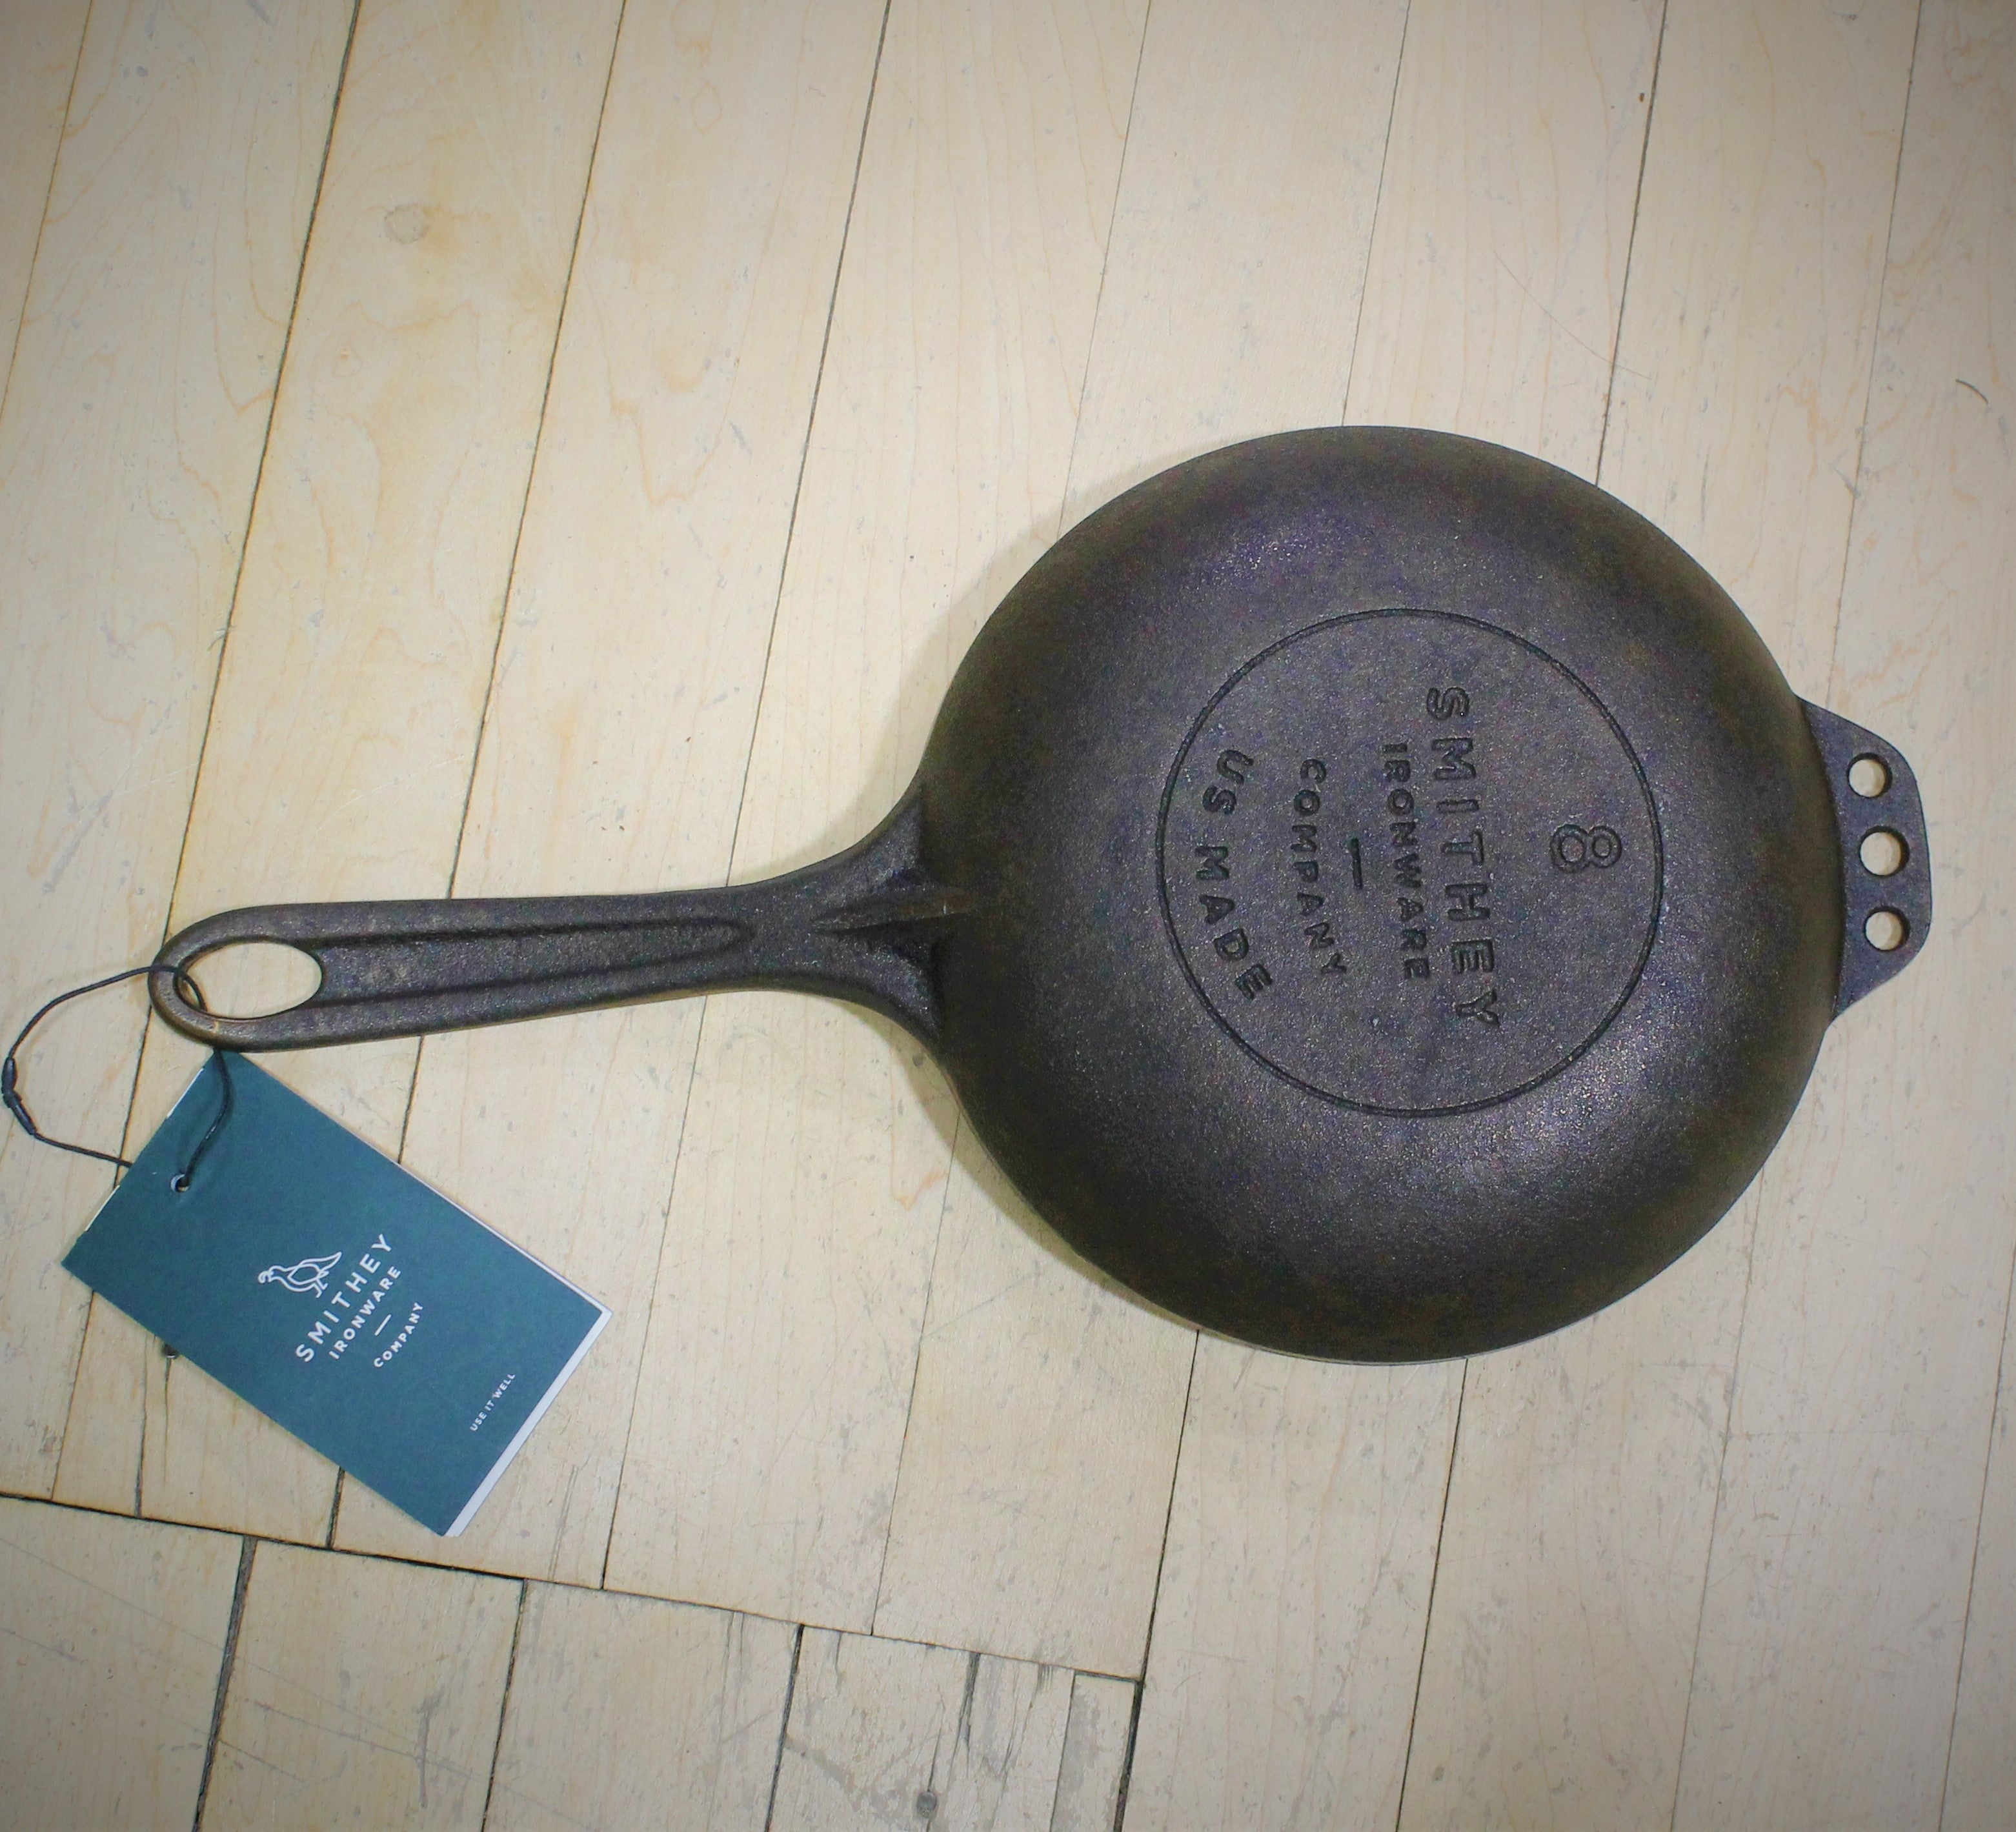 No. 8 Cast-Iron Chef Skillet by Smithey Ironware Co. - Fieldshop